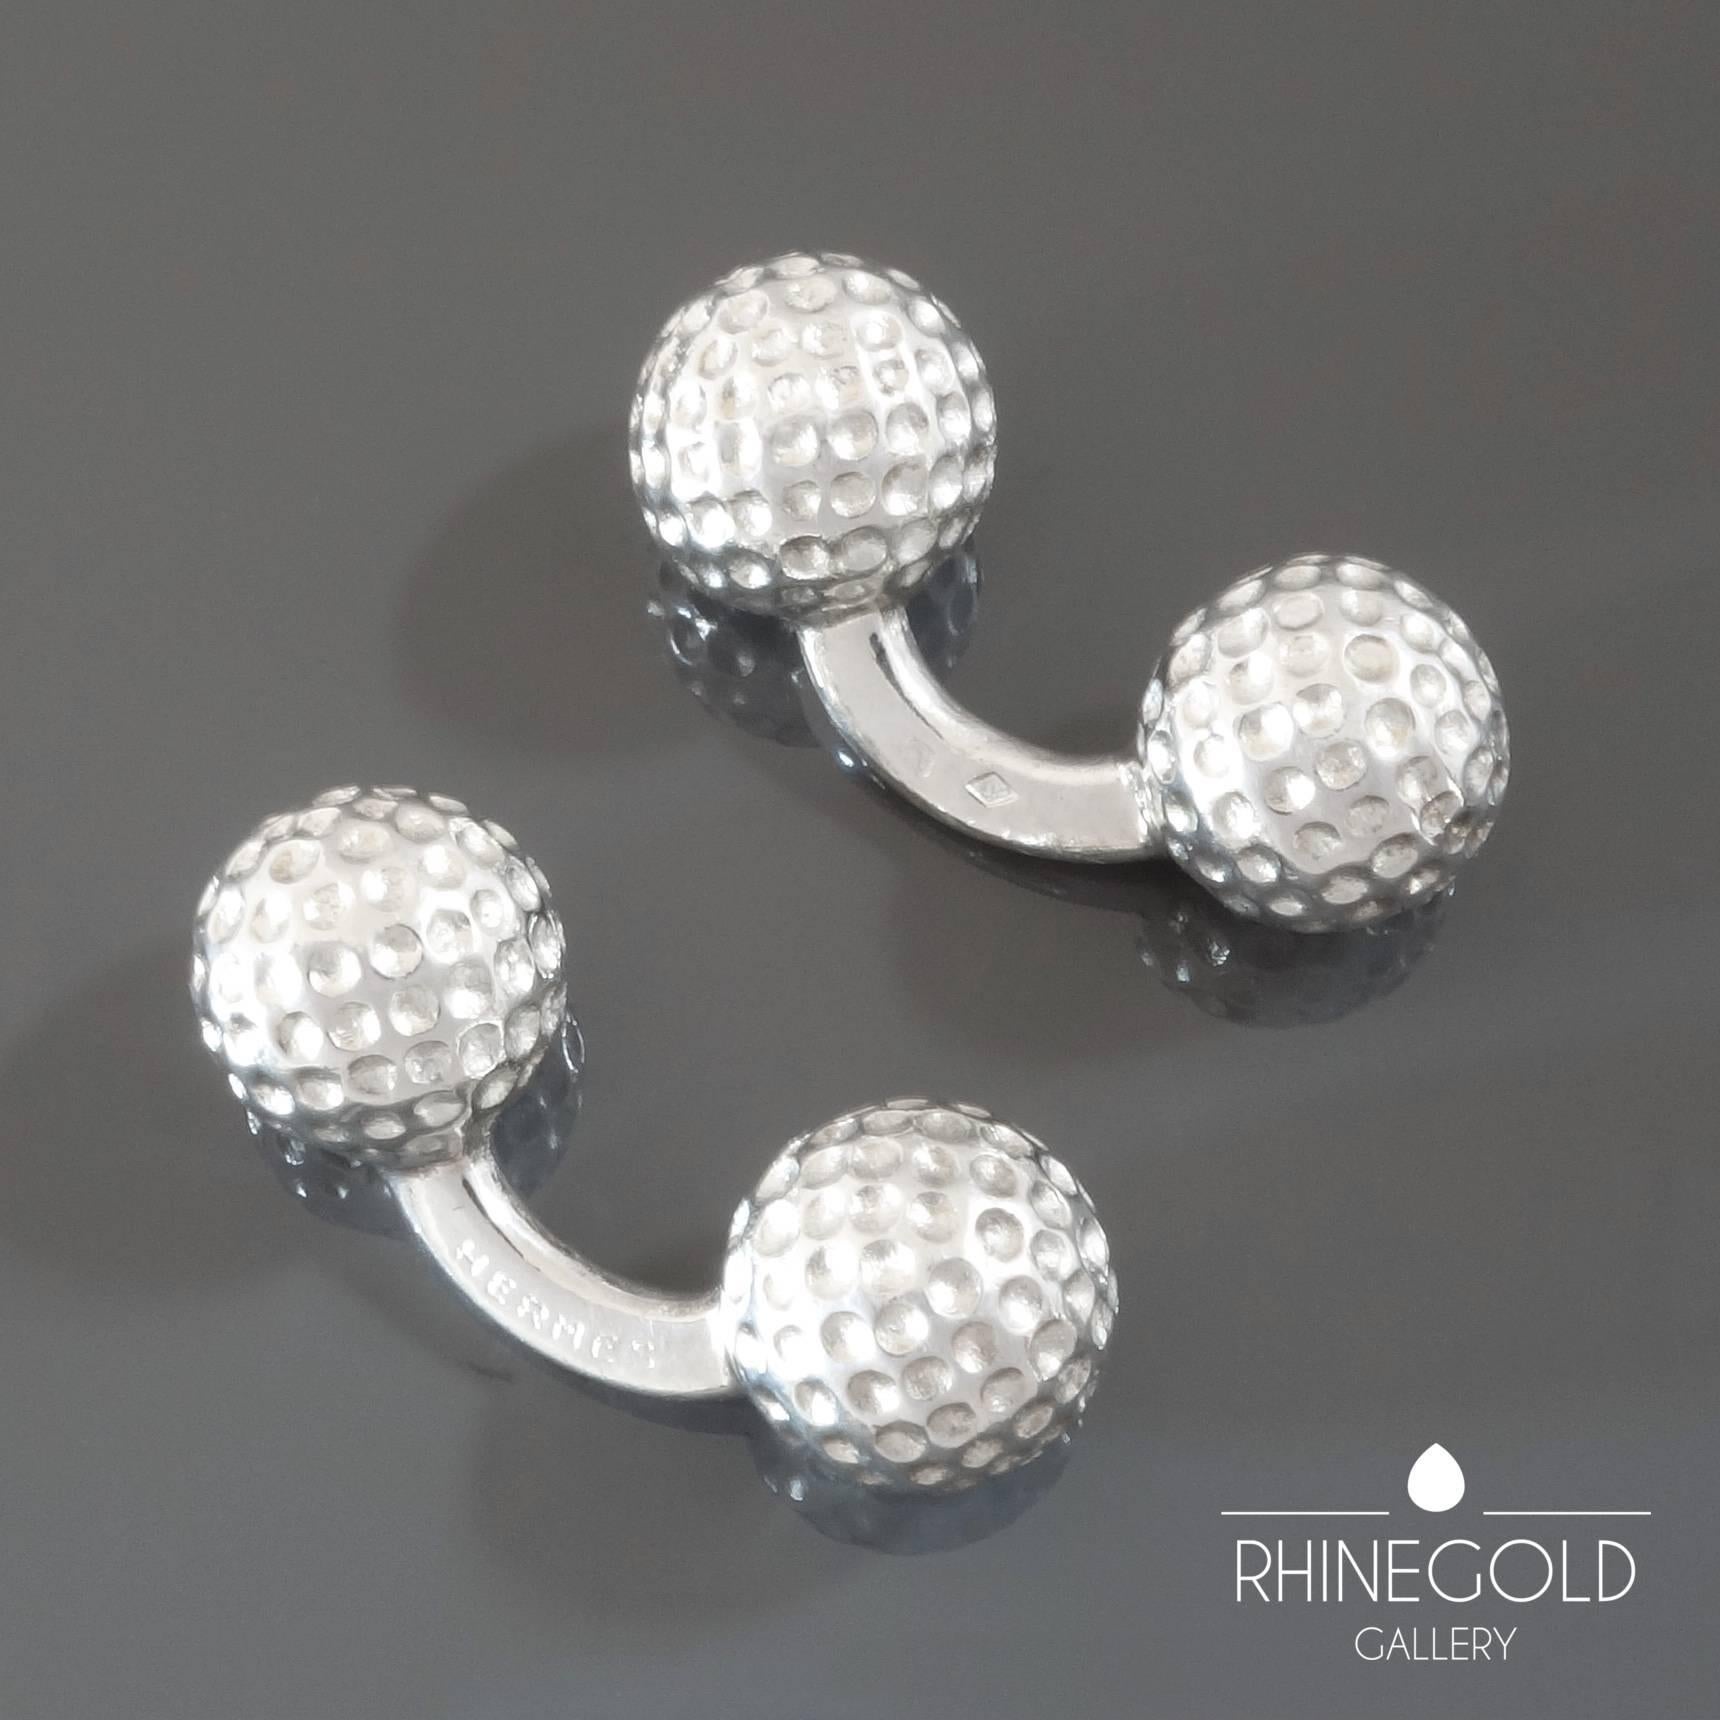 Hermès:  A Pair of Silver Golfball Cufflinks
Weight approx. 22.2 grams
Diameter of golf balls 1.0 cm (approx. 3/8”)
Marks: ‘HERMÈS’, French crab mark for silver, maker’s mark
France, 1970s - 1984

Solid, easy to adjust and to wear. Classic.
